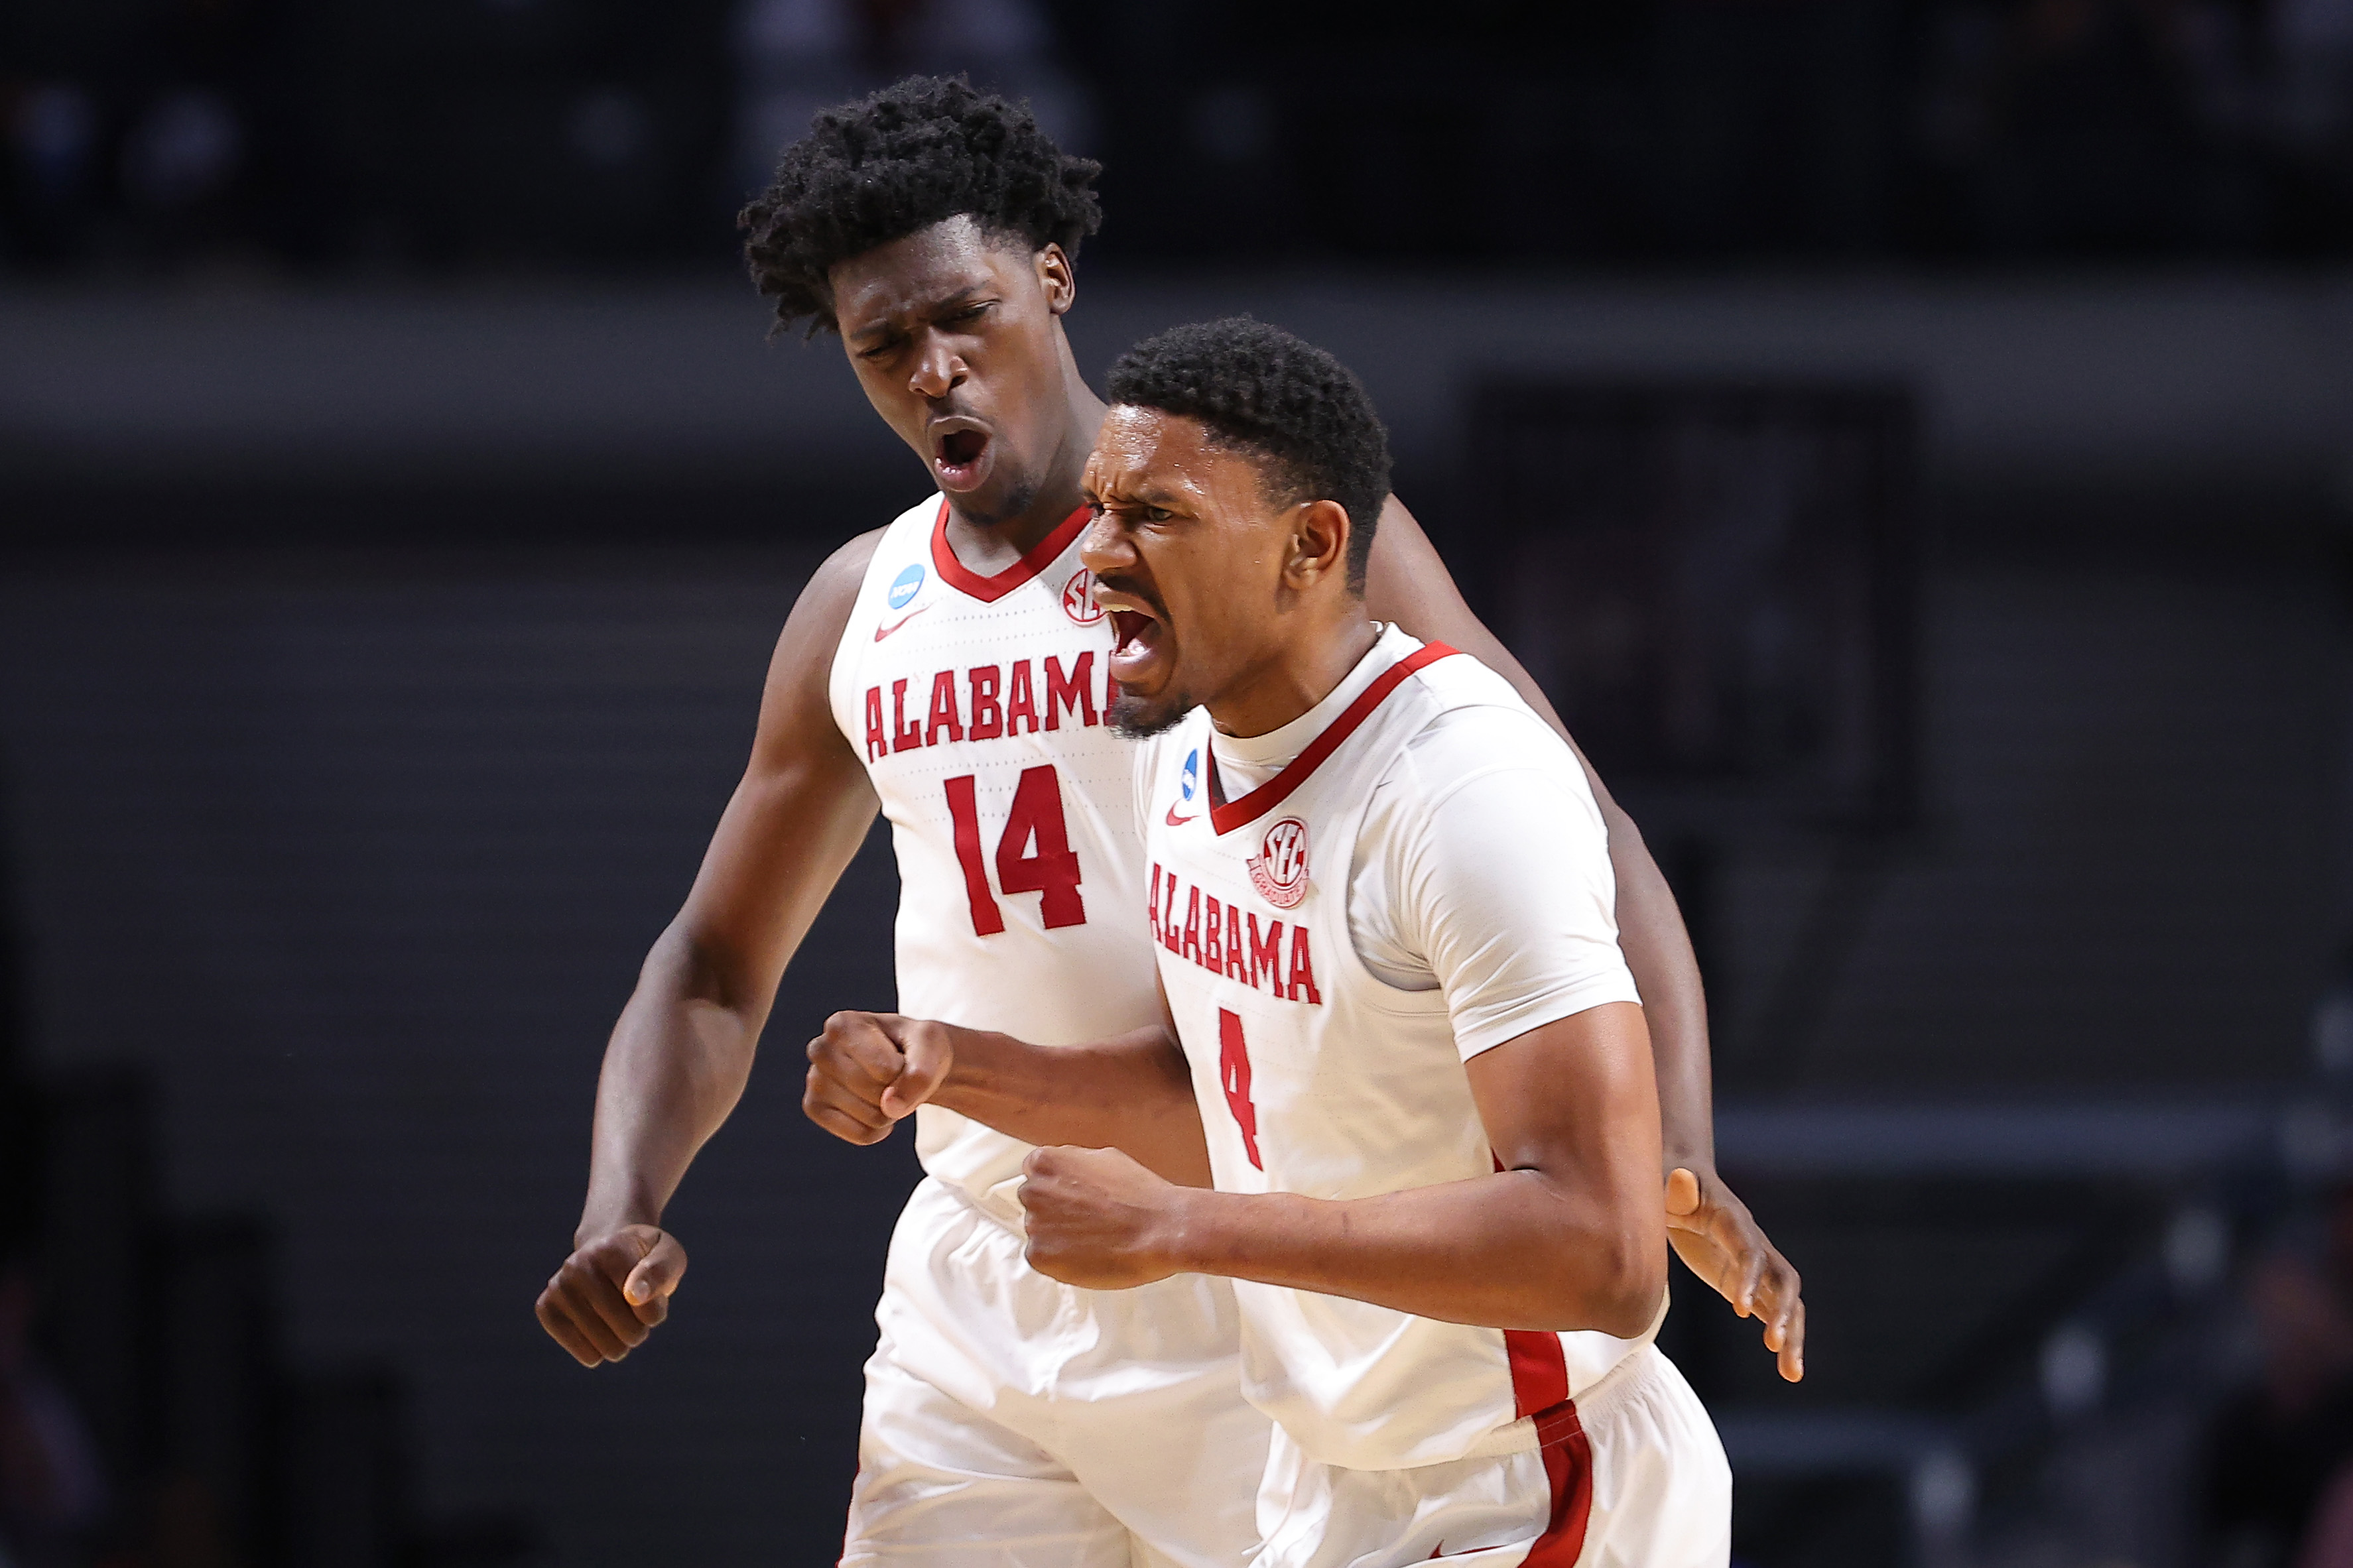 Friday's March Madness: No. 1 Seeds Alabama and Houston Are Out